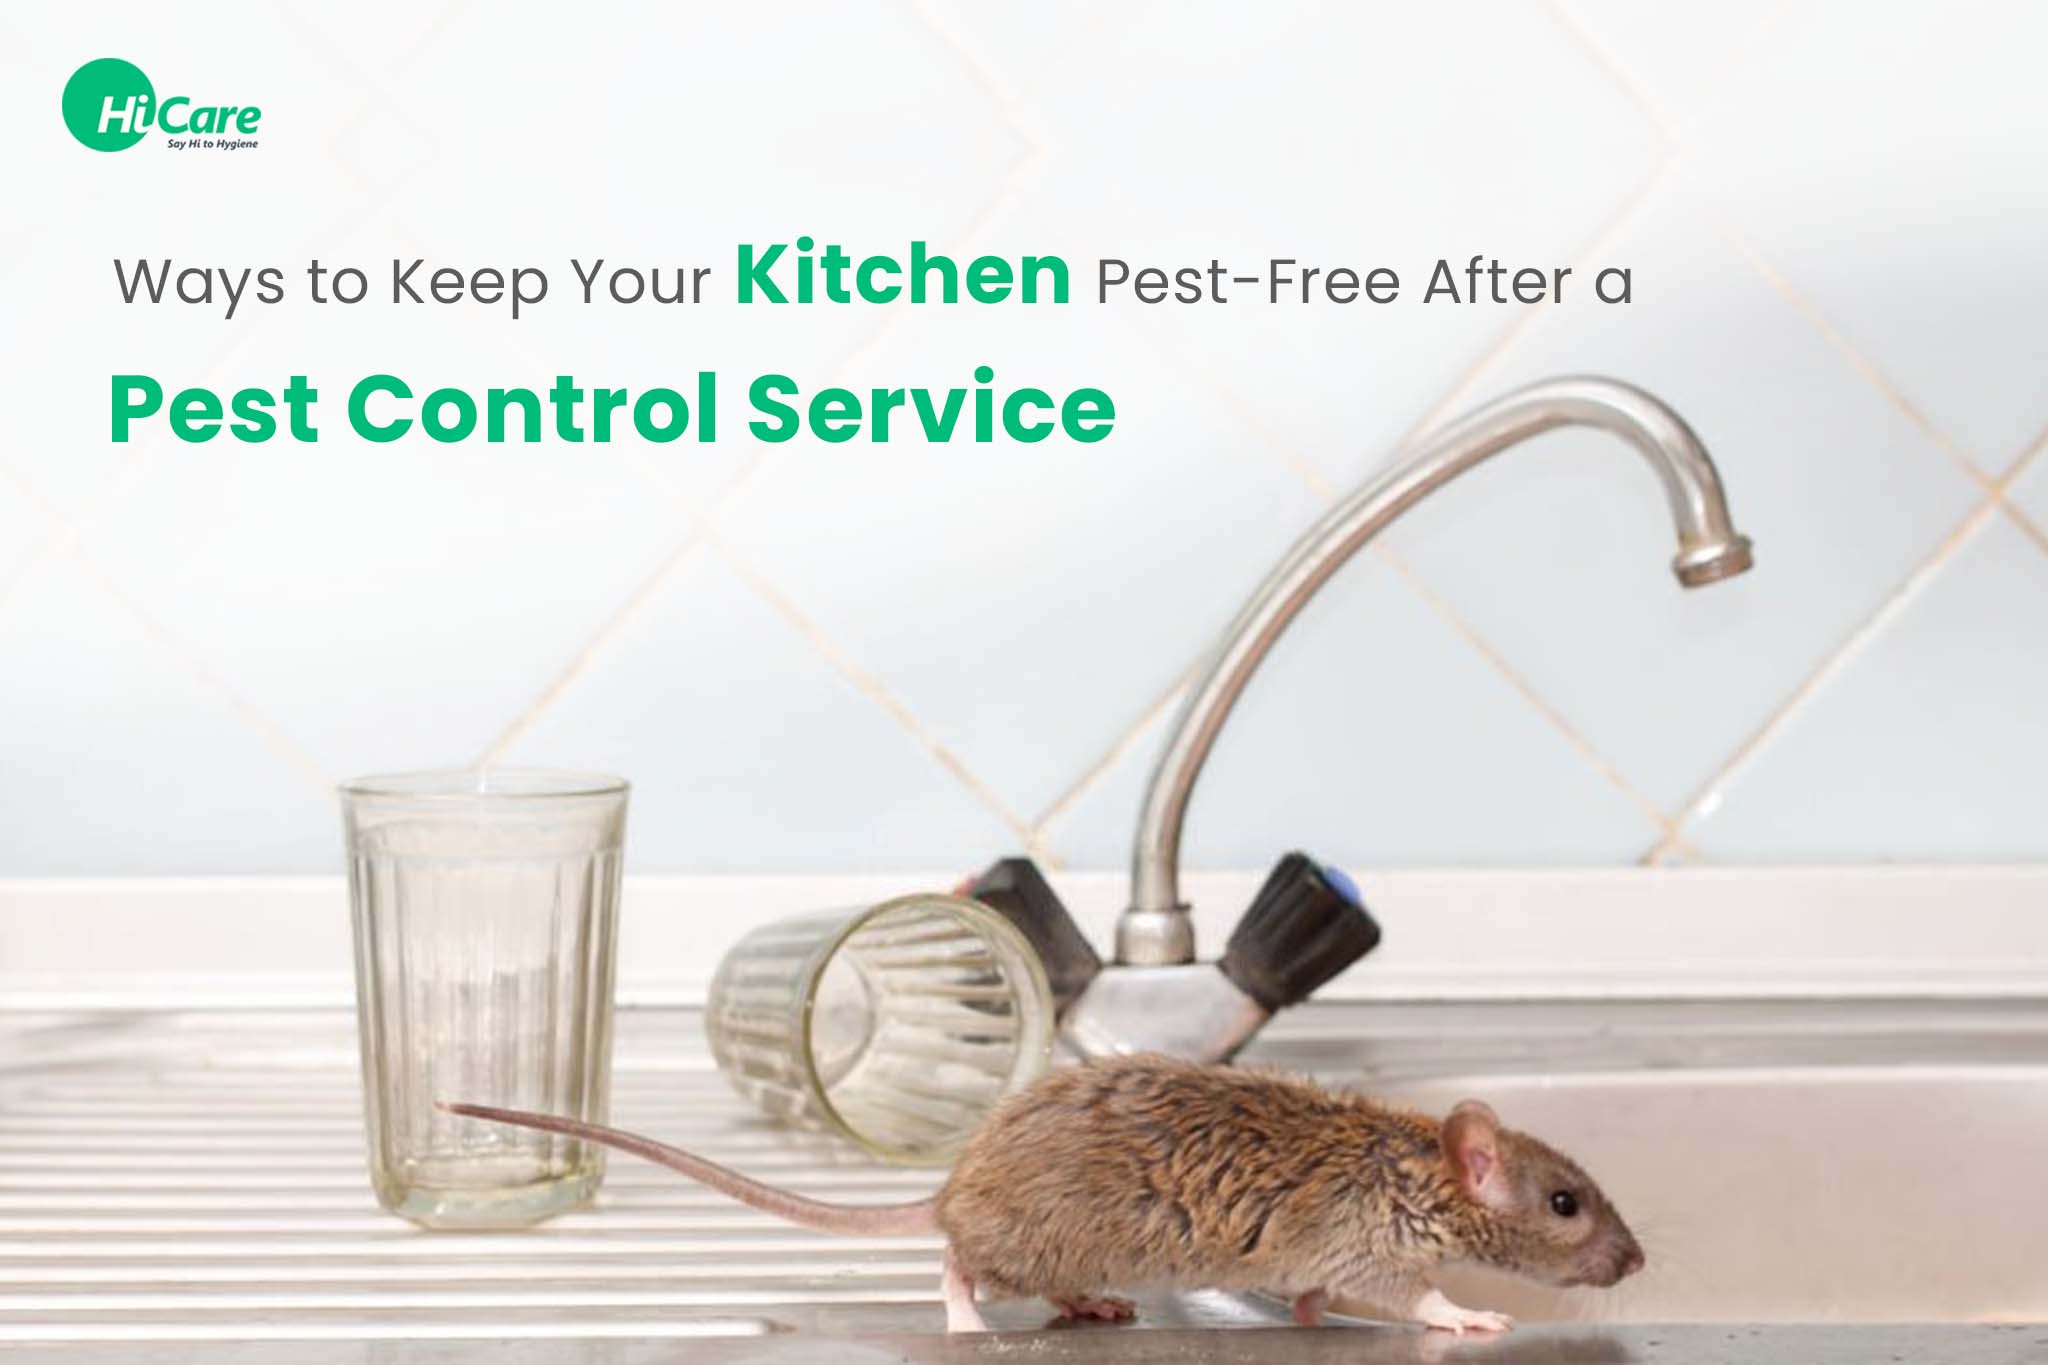 6 Ways to Keep Your Kitchen Pest-Free After a Pest Control Service